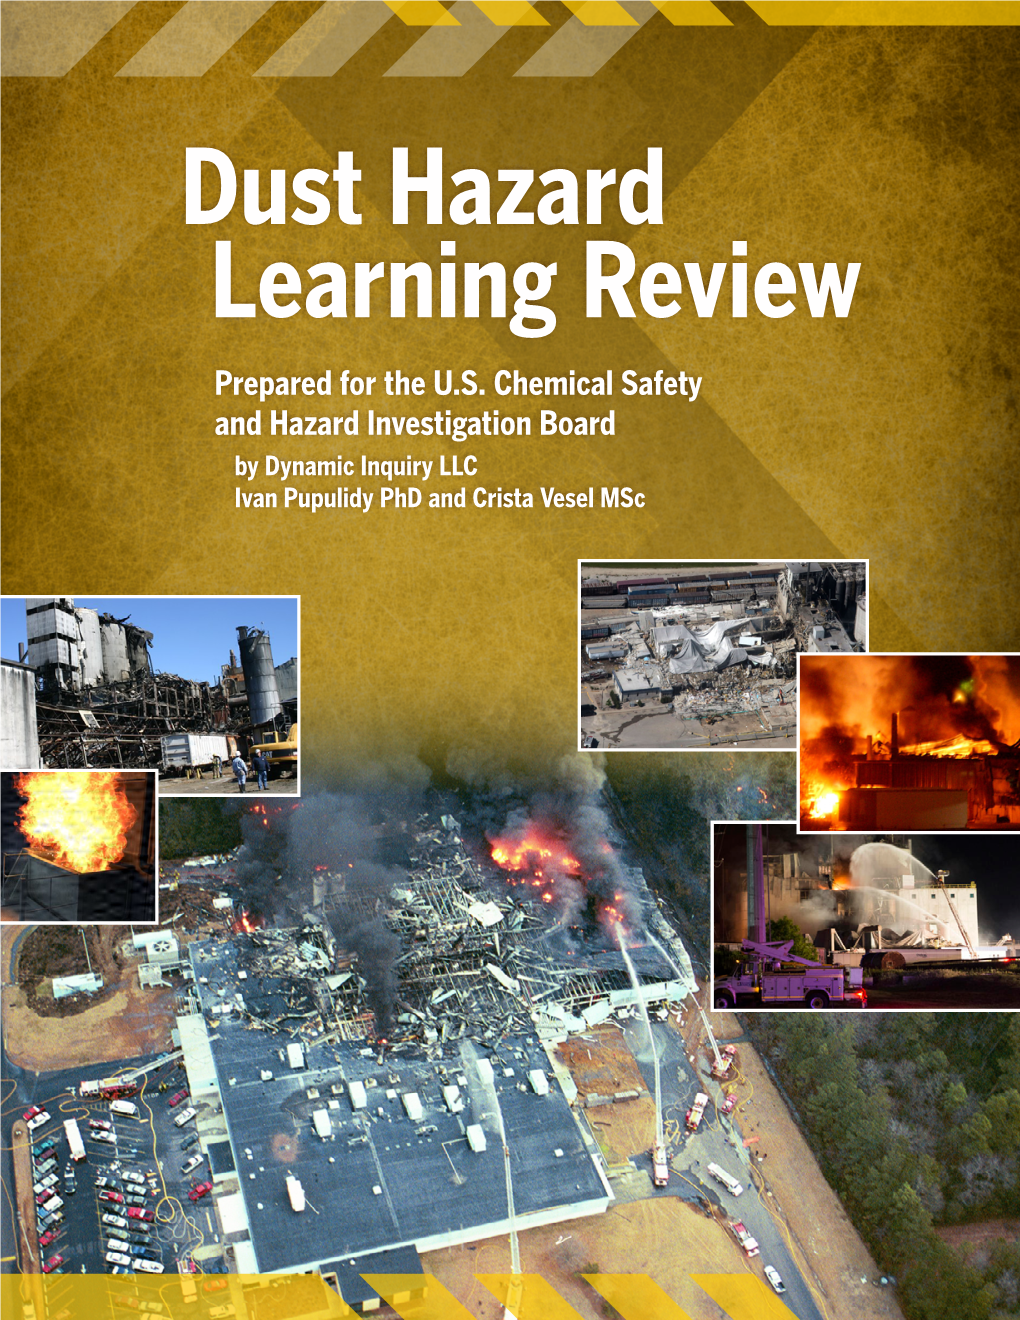 Dust Hazard Learning Review Dust Hazard Learning Review Prepared for the U.S